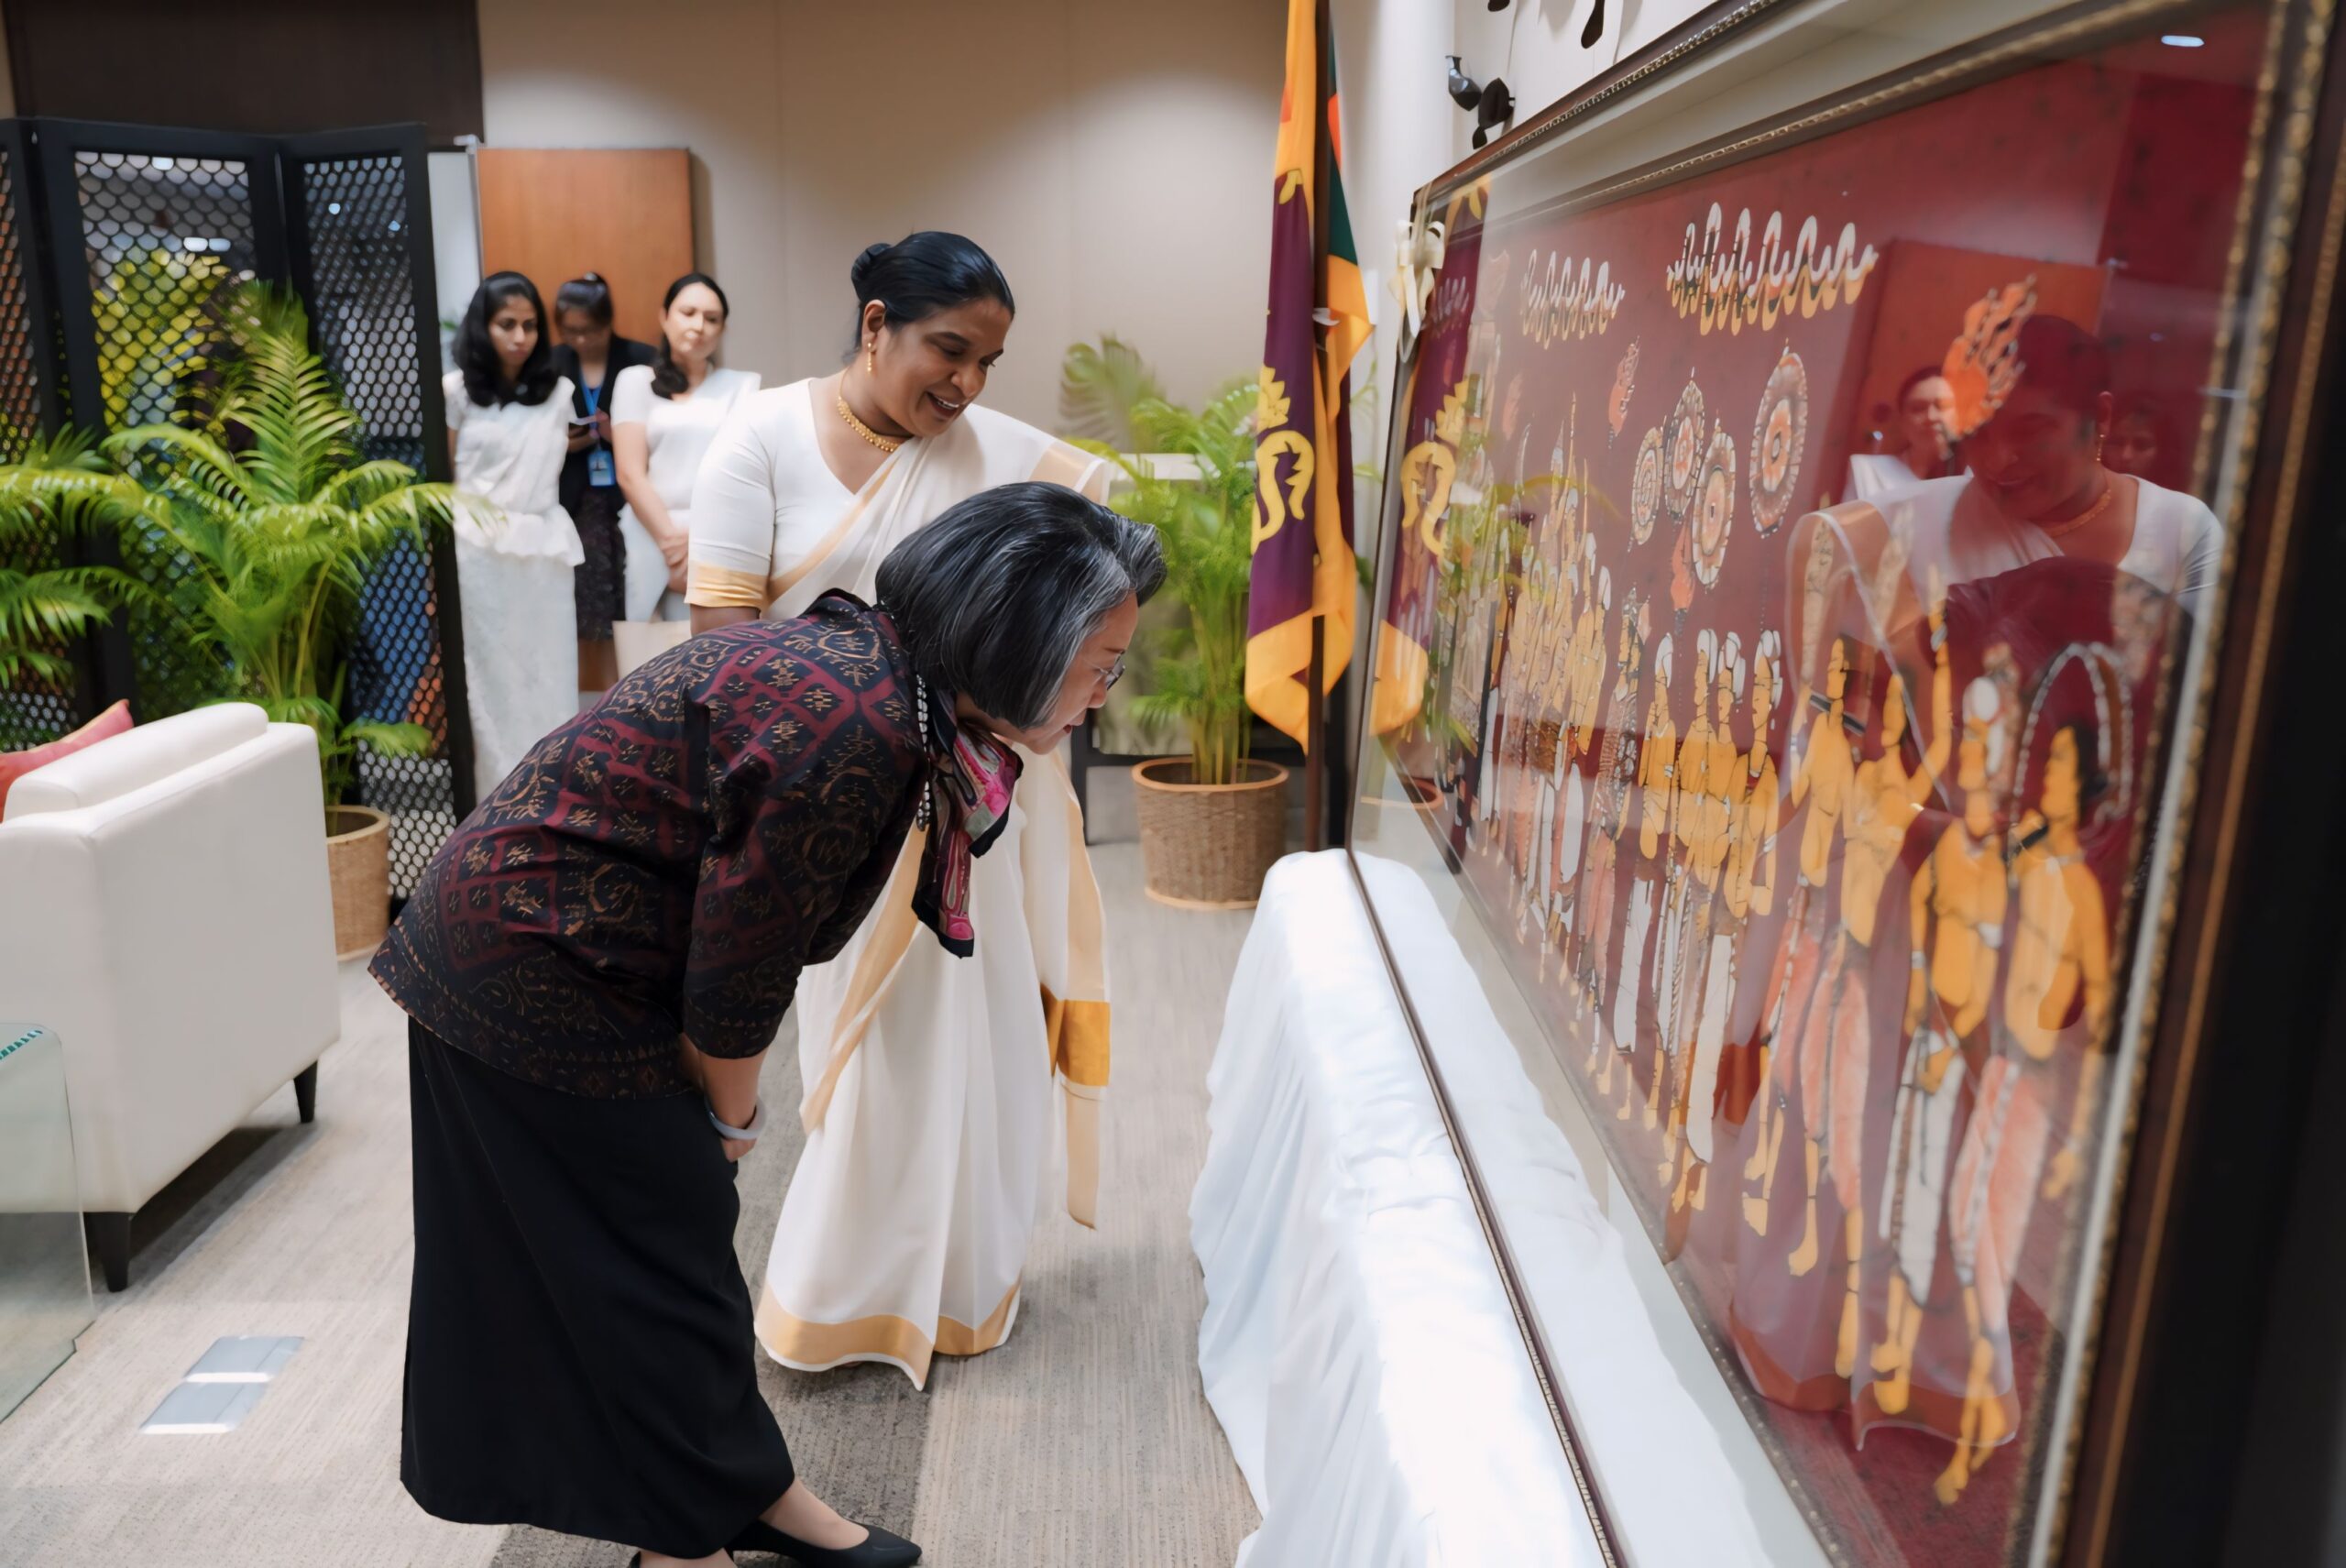 Commemorating the 25th Anniversary of UN Proclamation of the International Day of Vesak, Sri Lanka gifts an Art work of ‘Sri Dalada Perahera’ to UNESCAP for displaying at the United Nations Conference Centre (UNCC) in Bangkok